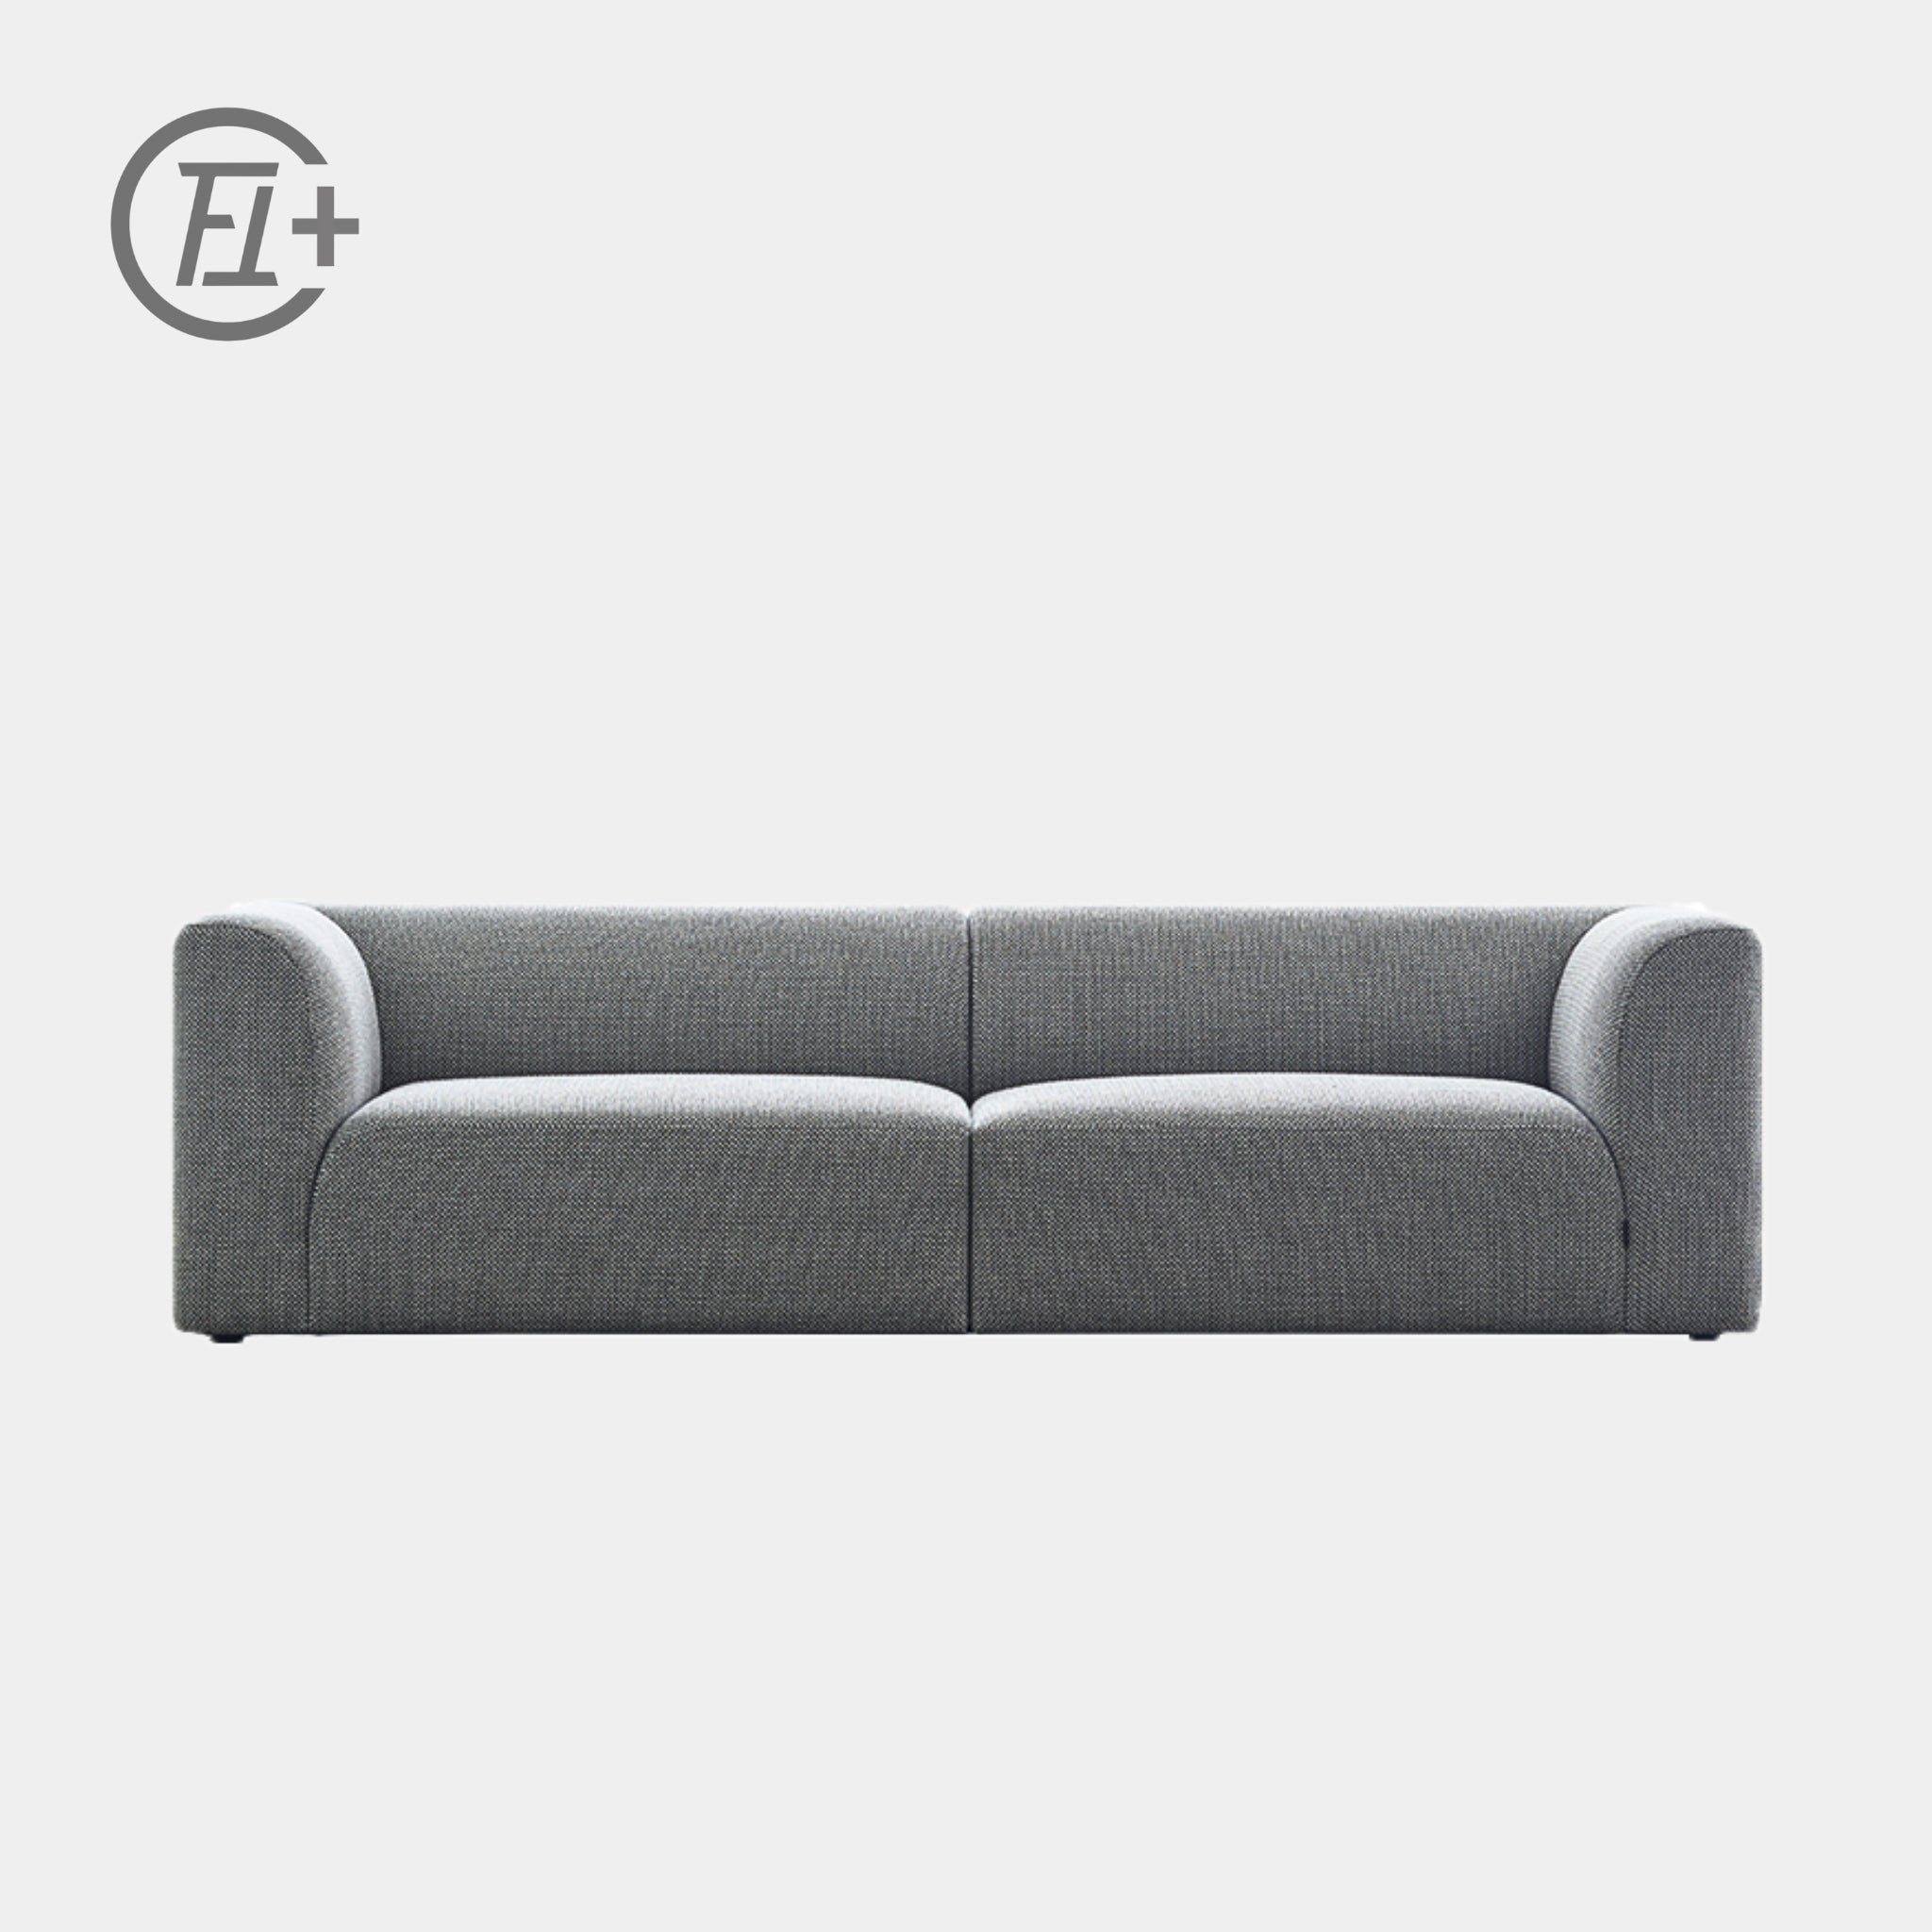 The Feelter Lux Sofa